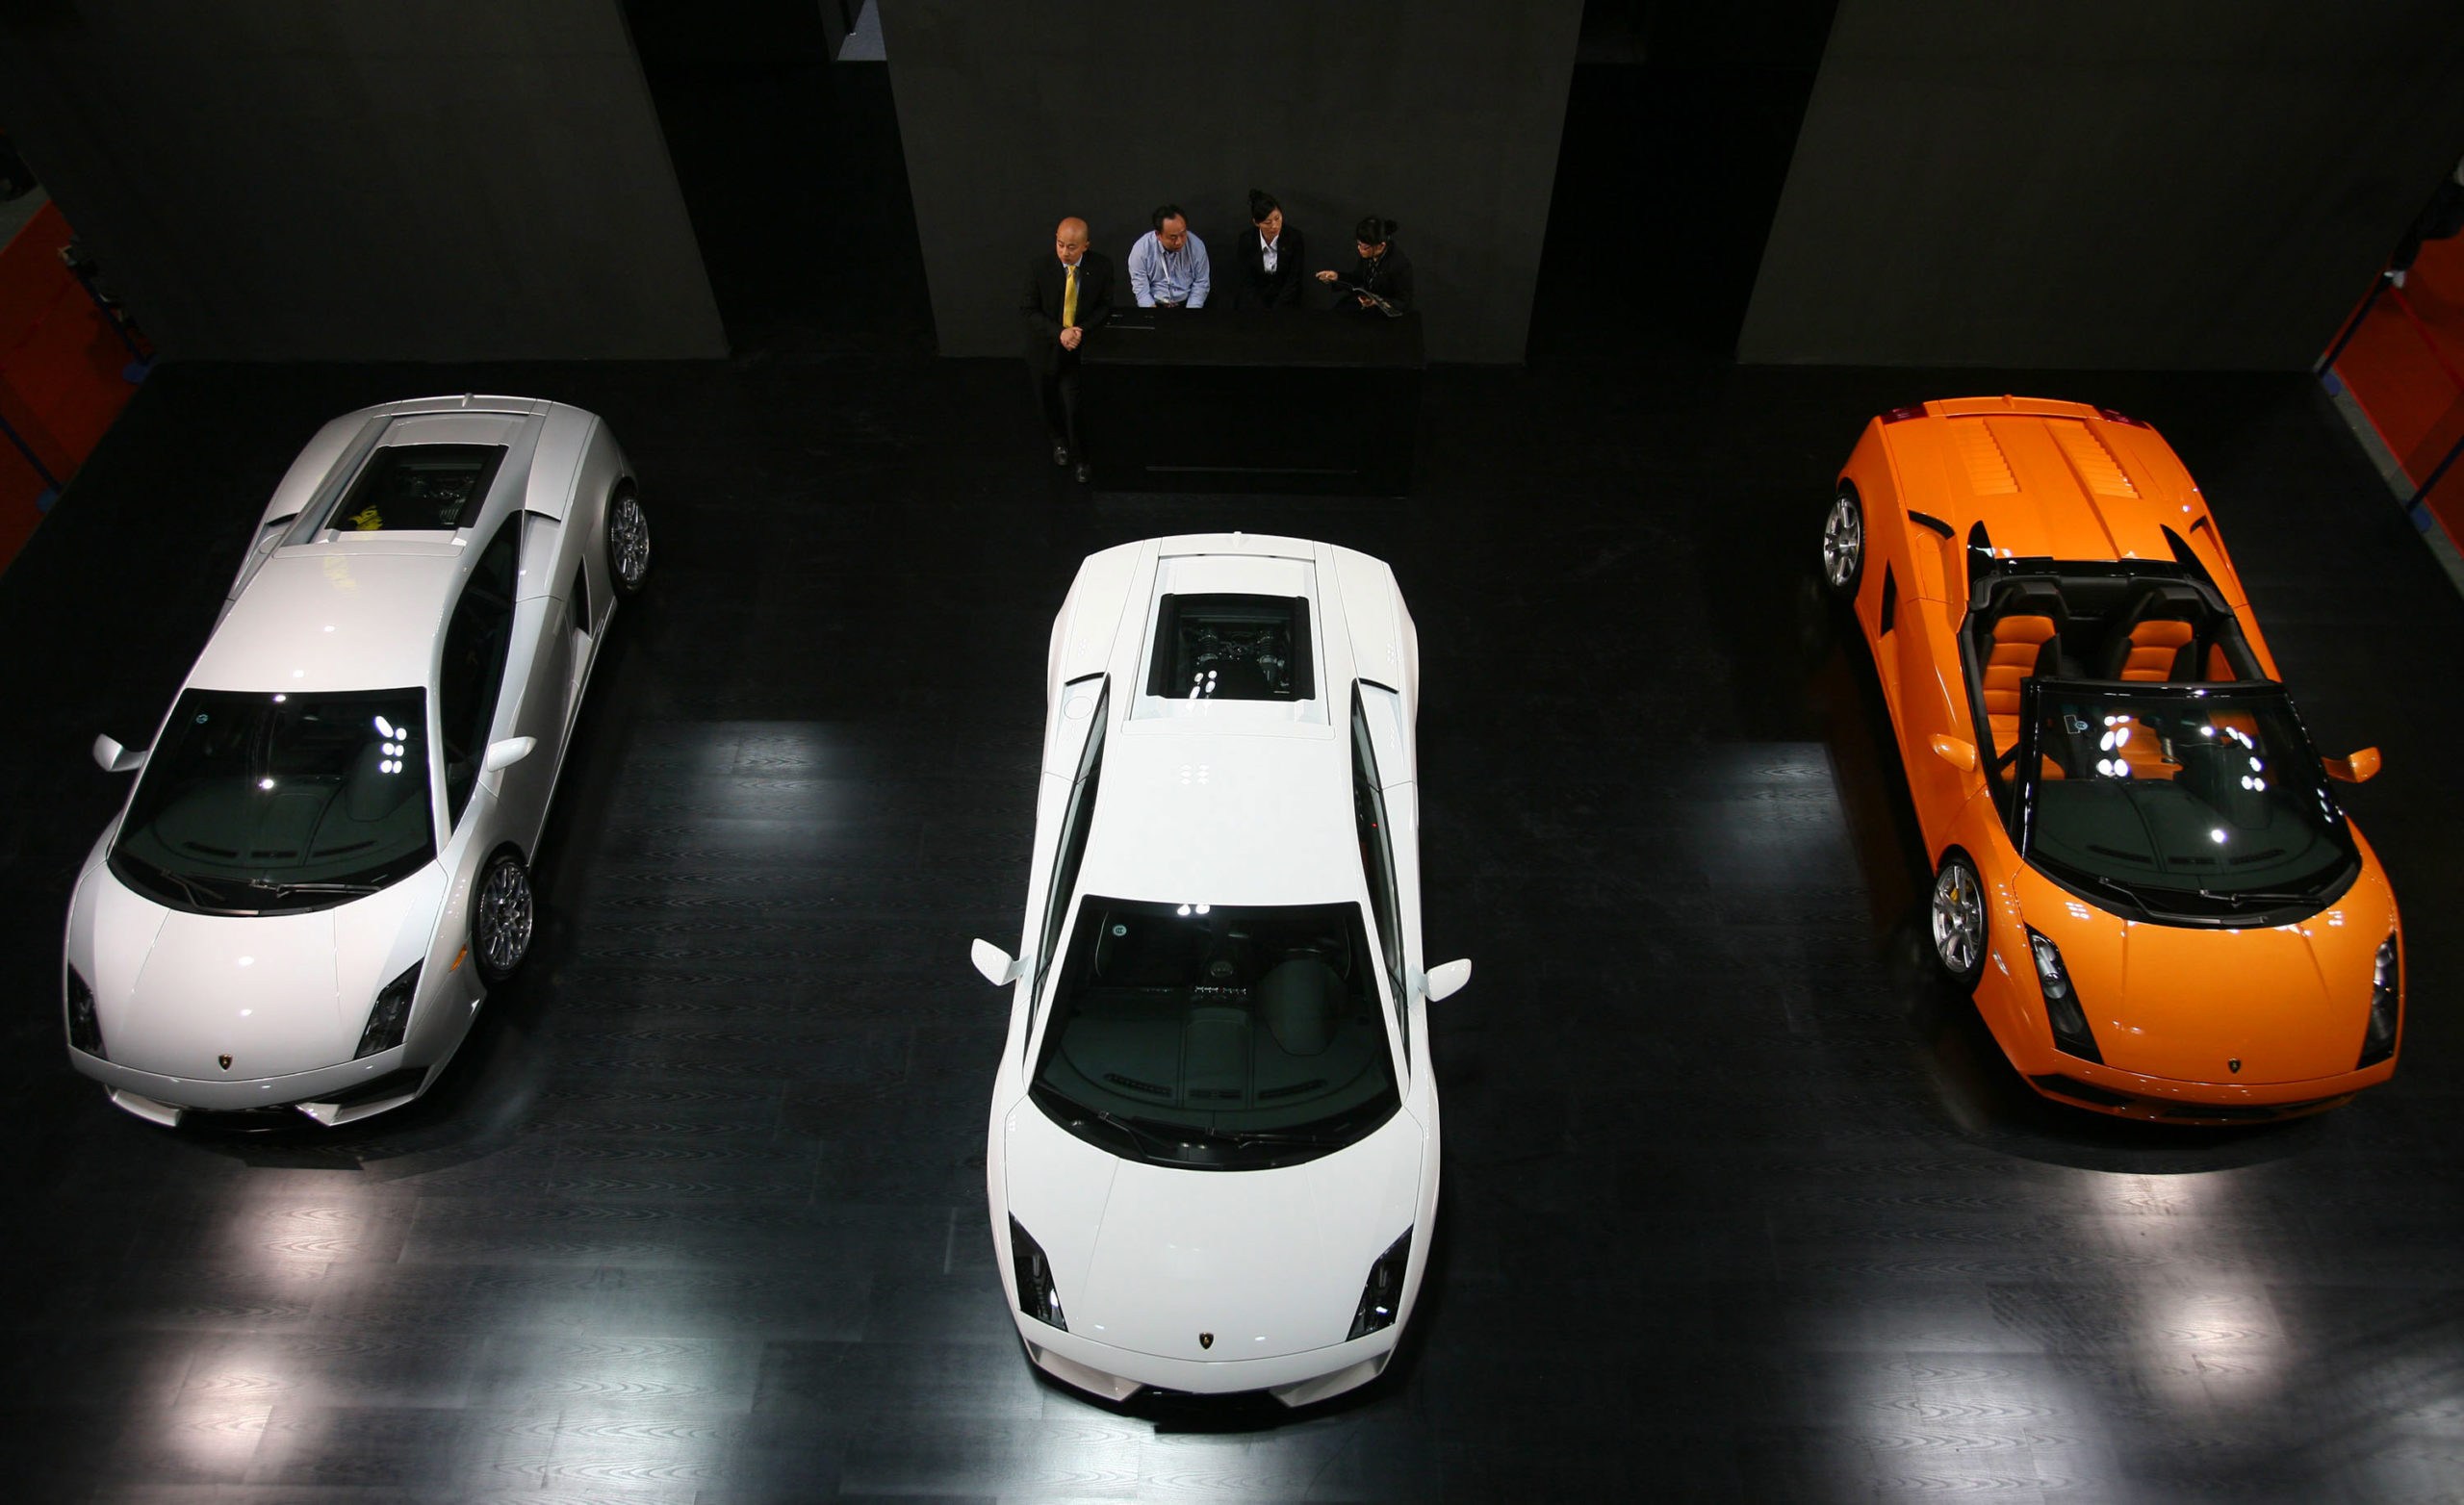 CHONGQING, CHINA - OCTOBER 9: (CHINA OUT) Lamborghini sedans are displayed at the 2008 China Chongqing International Luxury Exhibition on October 9, 2008 in Chongqing, China. The event will be run from October 9 to 12. The Ministry of Commerce estimates that China will become the world's largest luxury market by 2014. (Photo by China Photos/Getty Images)